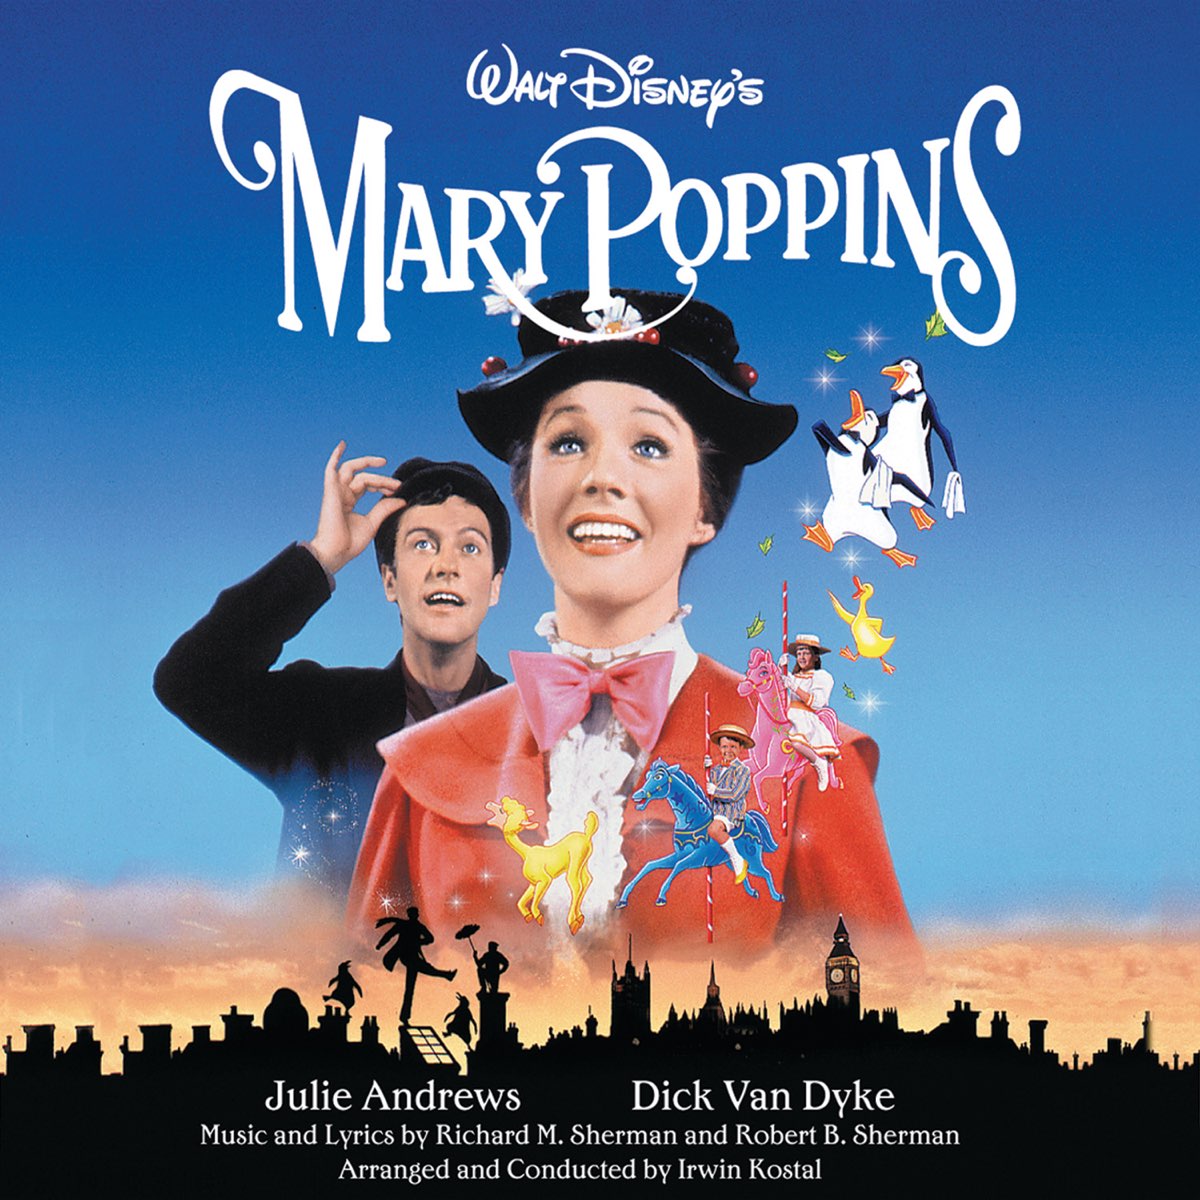 Mary Poppins (Original Motion Picture Soundtrack) by The Sherman Brothers,  Julie Andrews, Dick Van Dyke & Irwin Kostal on Apple Music